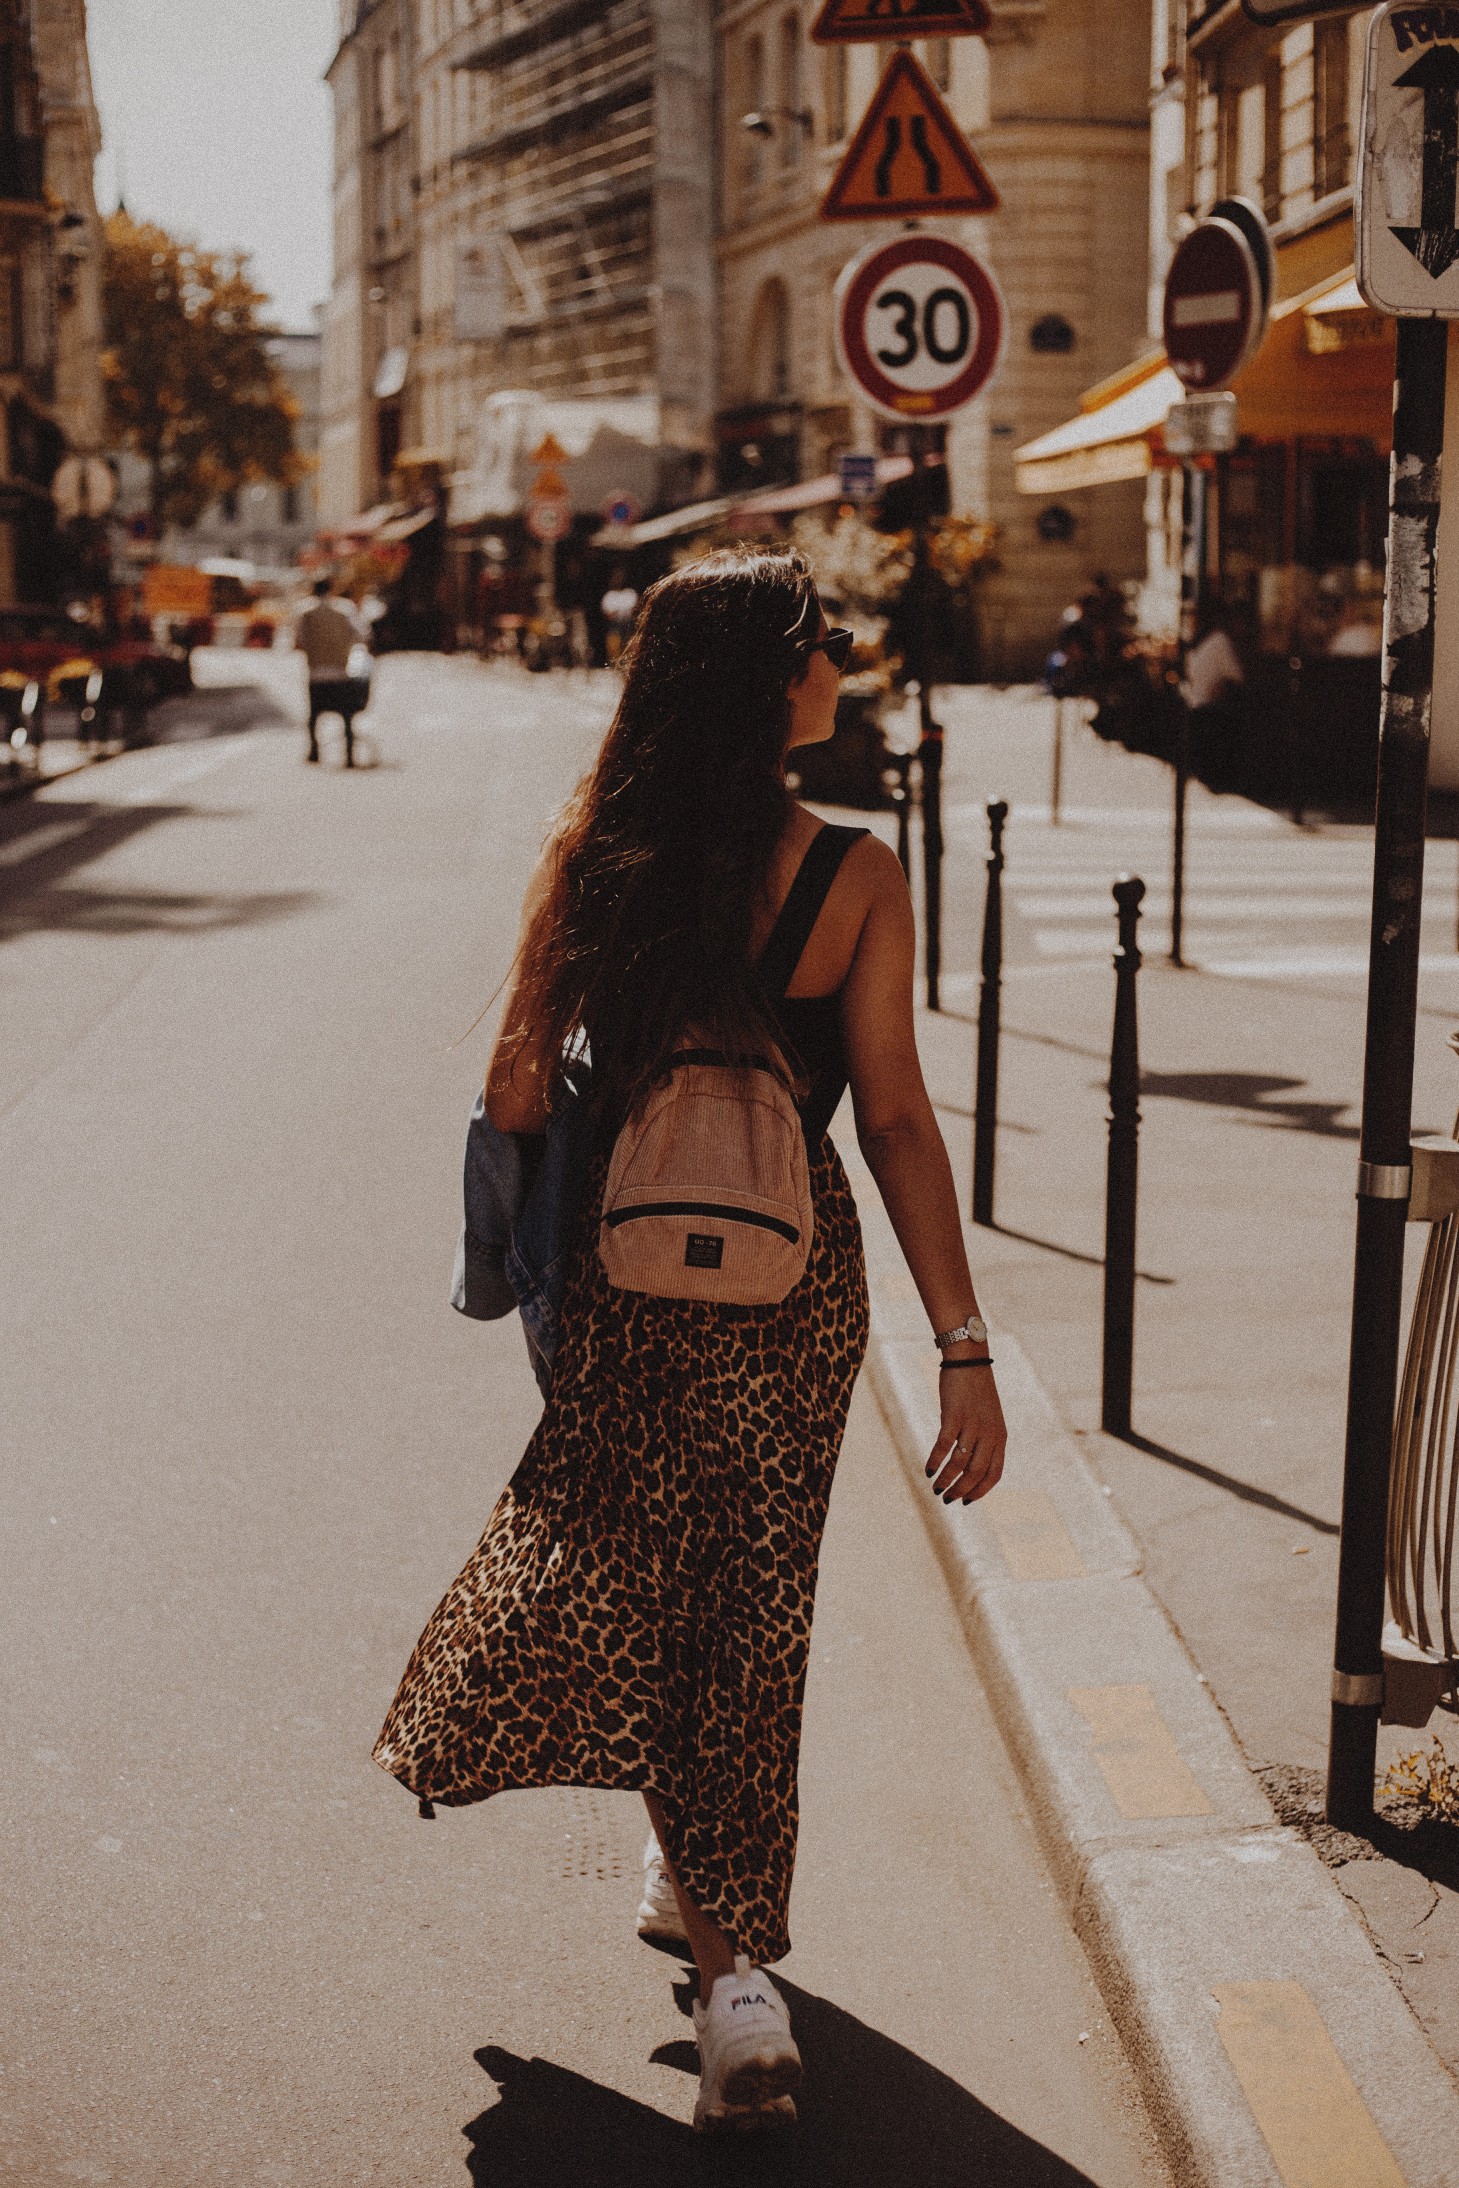 Woman with a backpack (Image Source: Pexels)